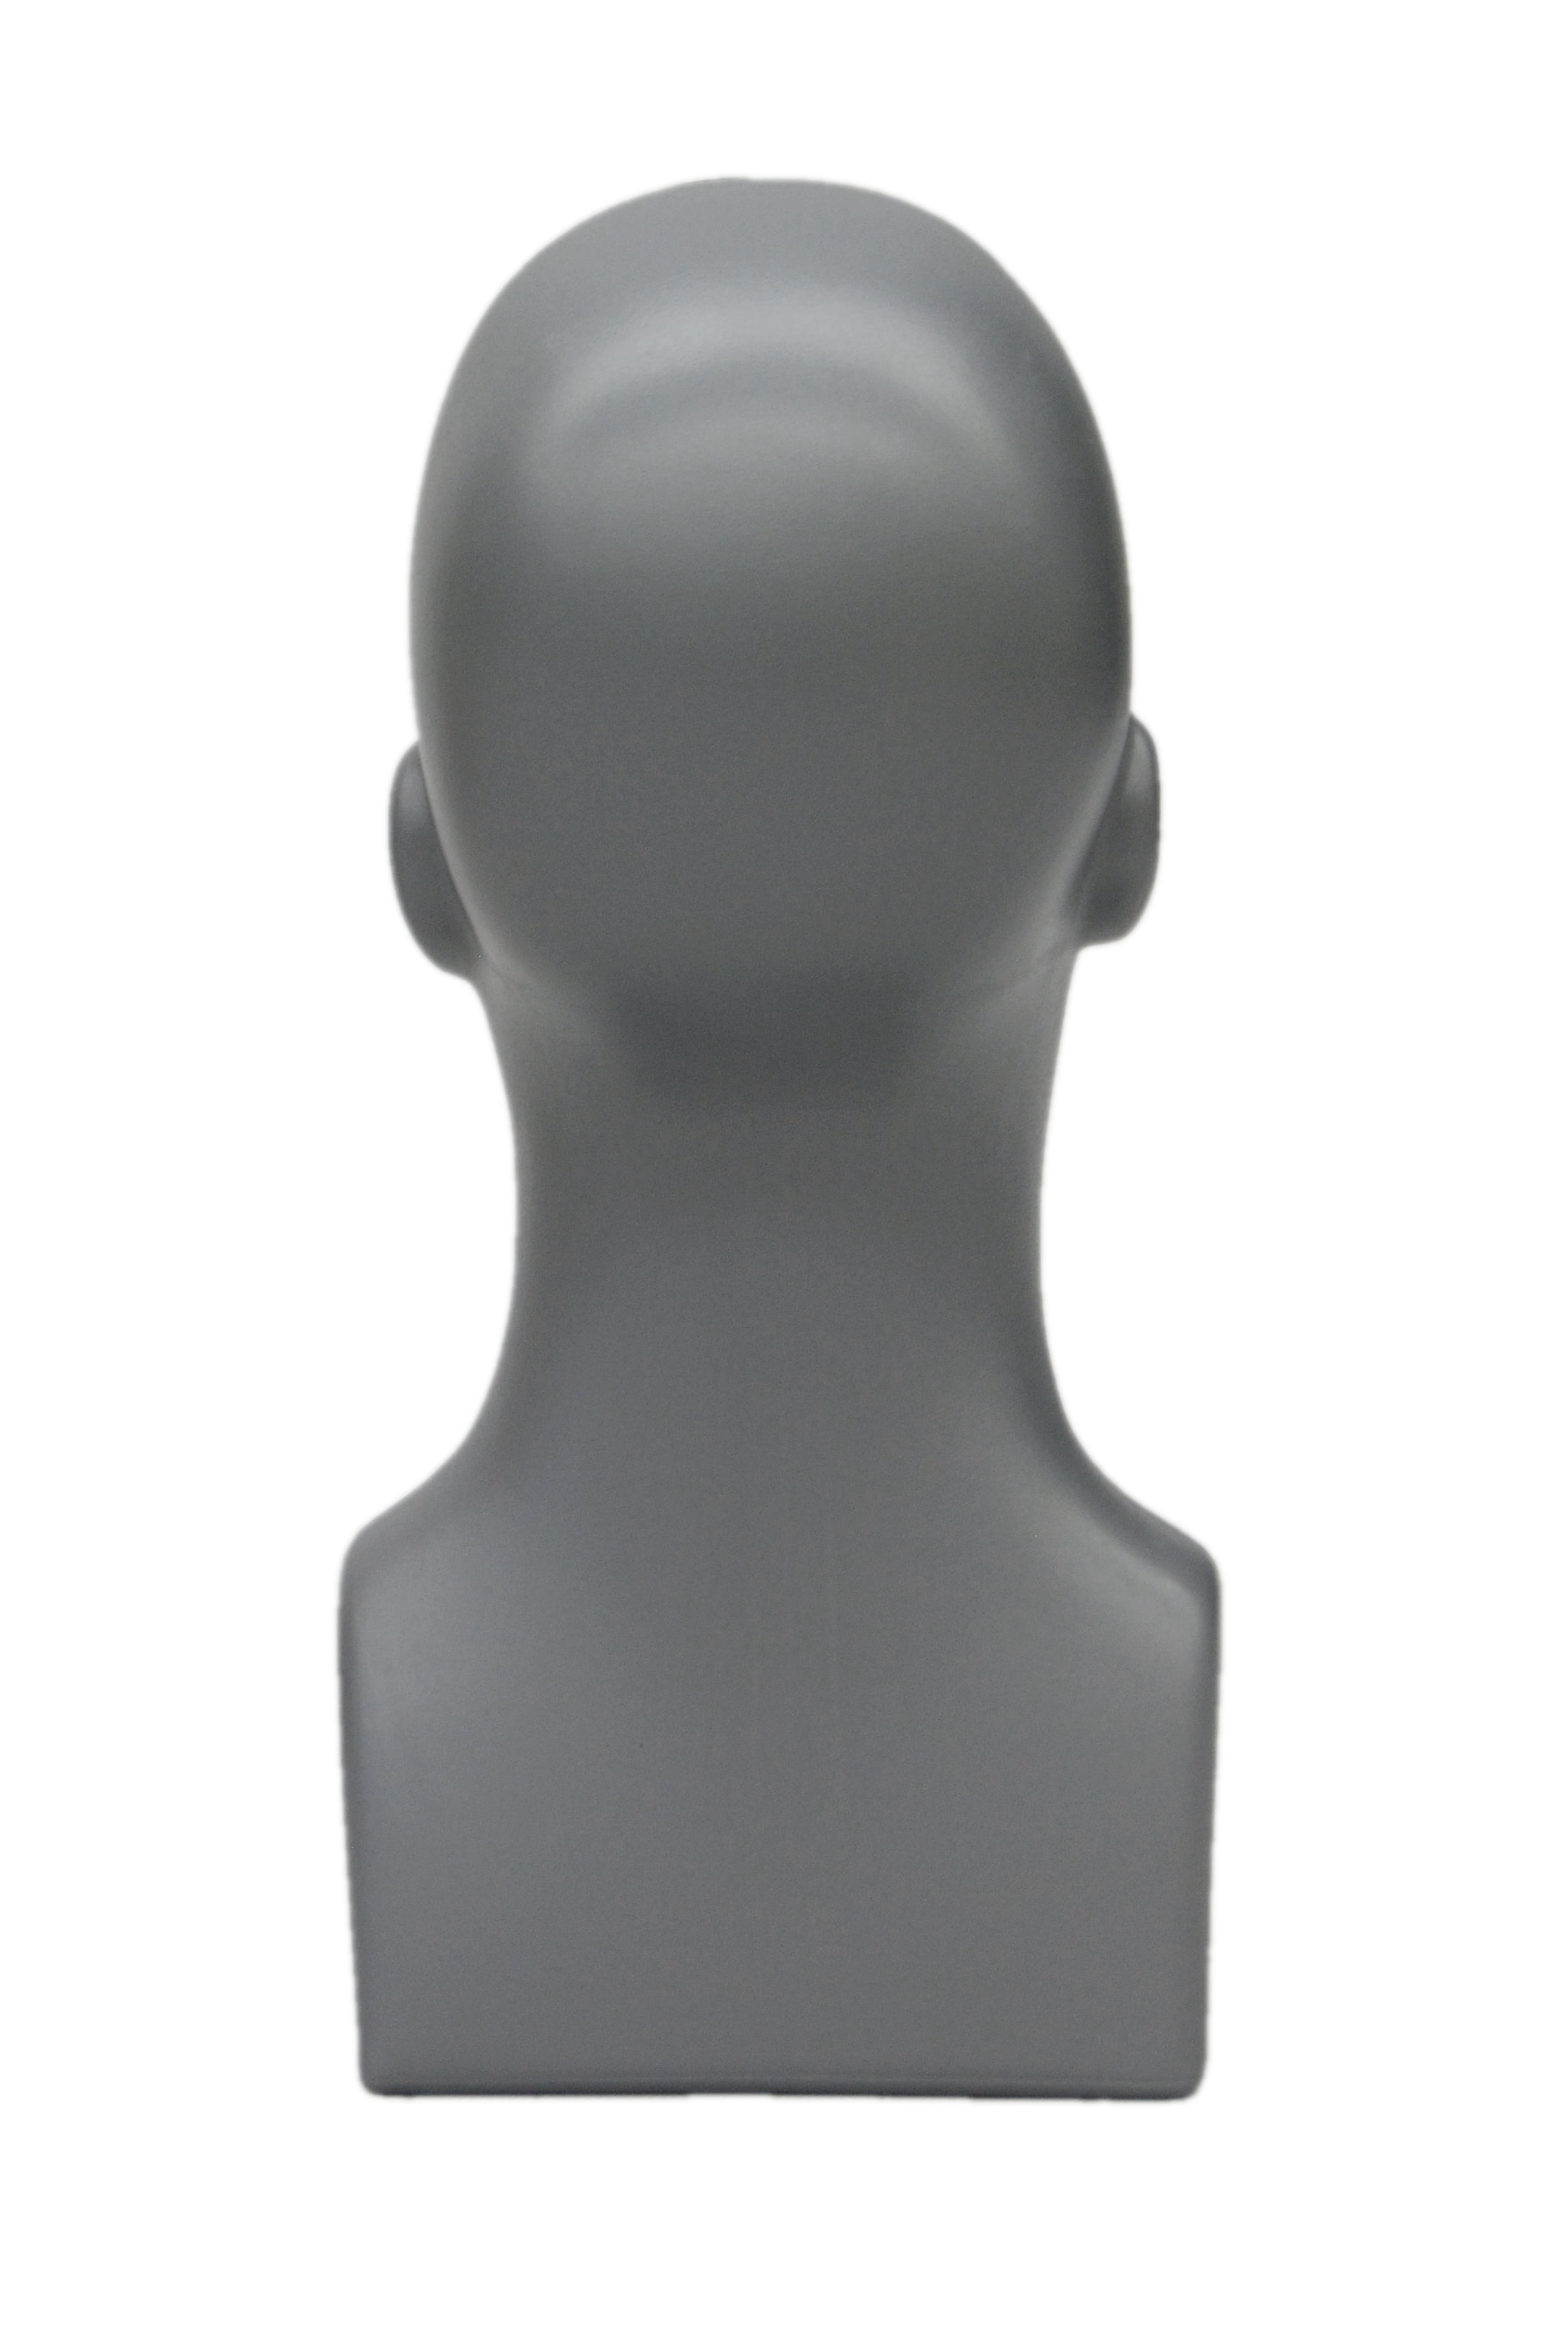 Gray Mannequin Head Display, 16 Tall Adult Male Plastic,2 Pack-M-GY